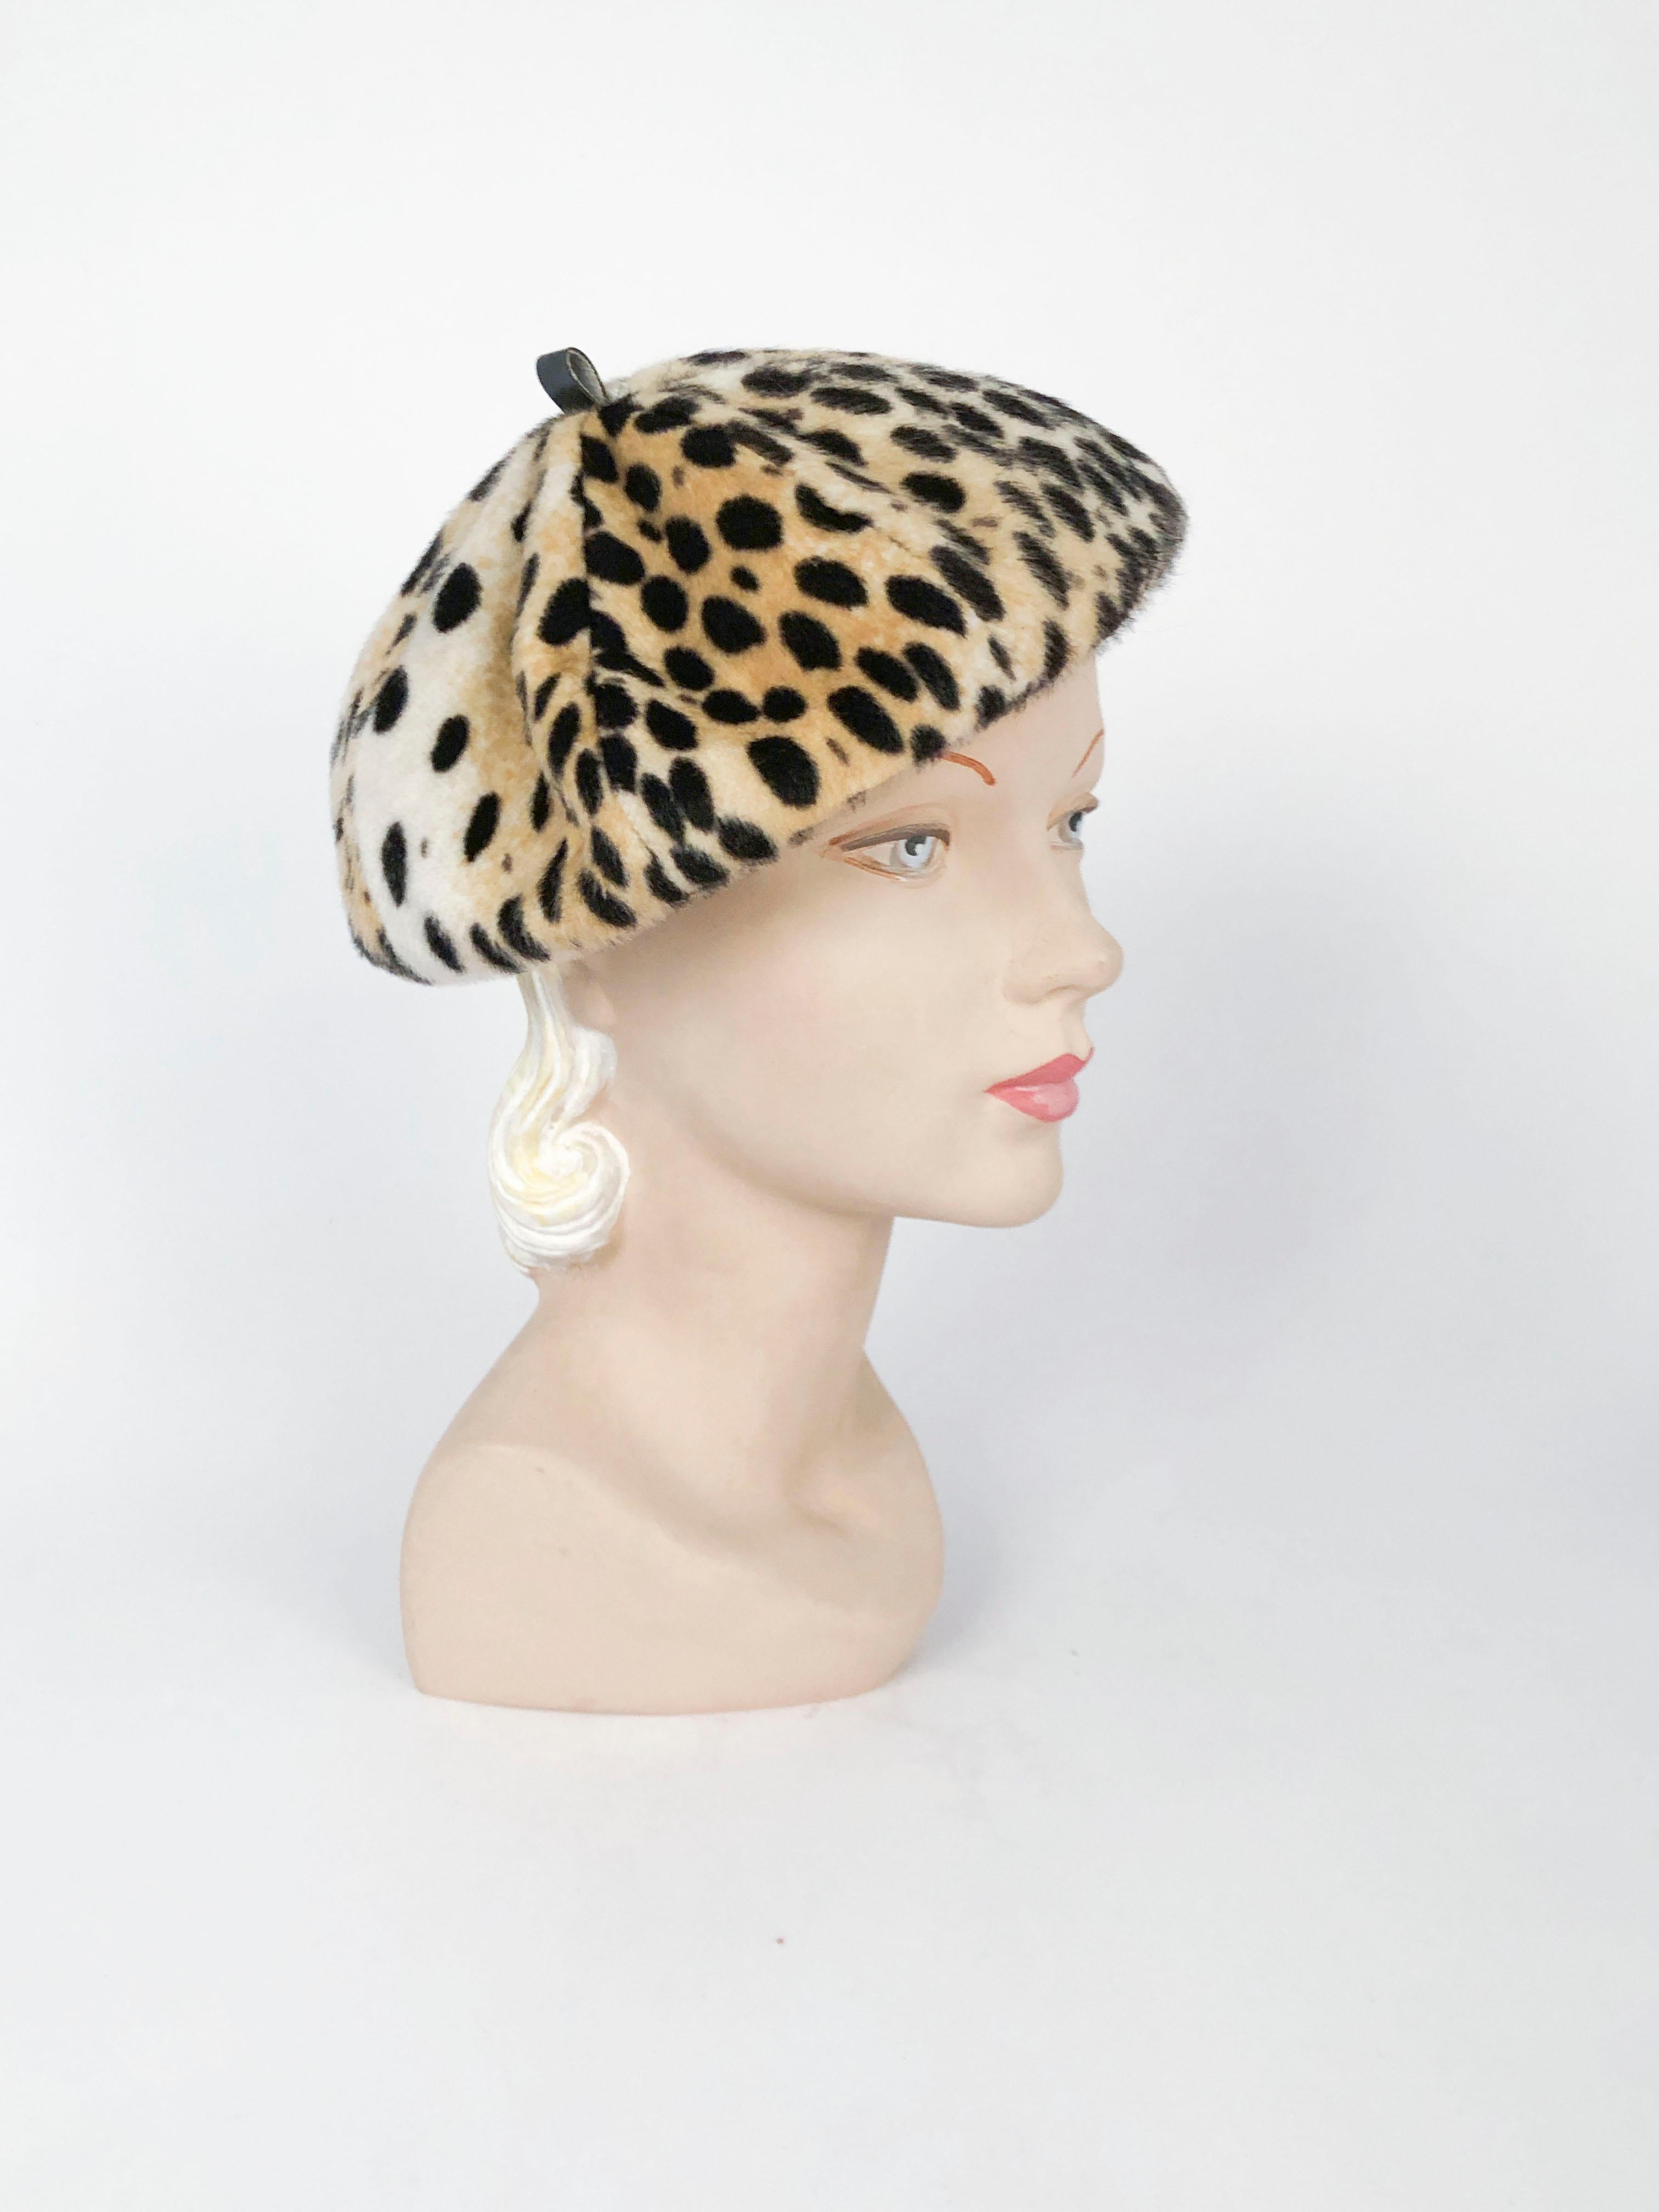 1970s Faux Fur Cheetah Print and Vegan Leather Beret. The inner band is made of vegan leather and matches the fabric on the hat stem finishing the 8-panel construction